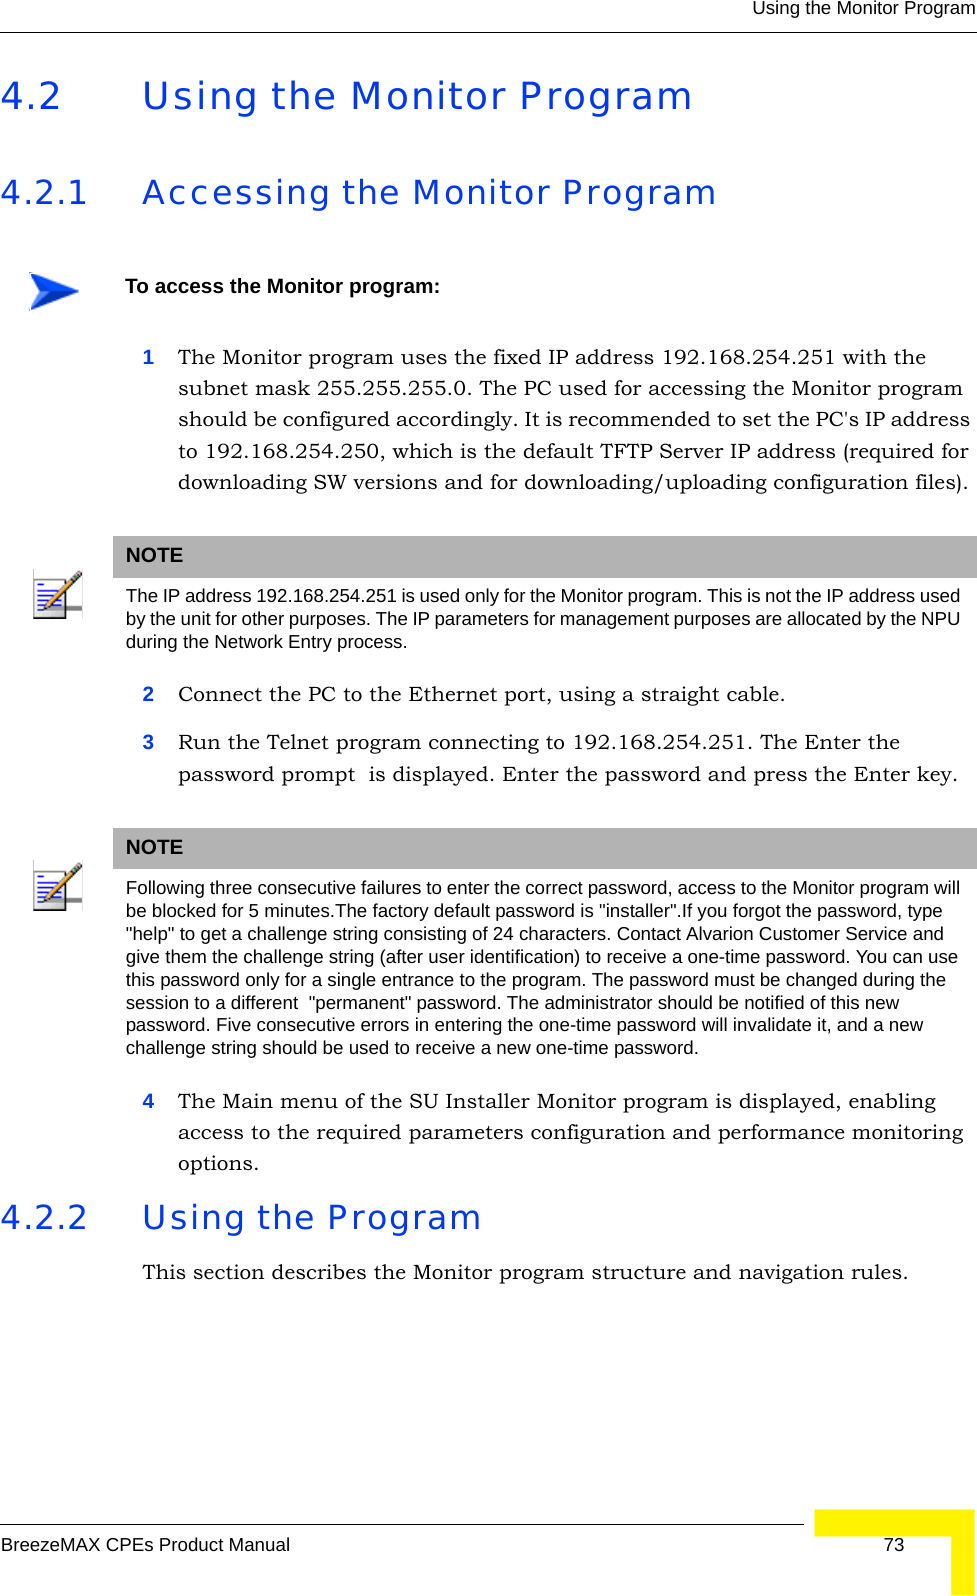 Using the Monitor ProgramBreezeMAX CPEs Product Manual 734.2 Using the Monitor Program4.2.1 Accessing the Monitor Program1The Monitor program uses the fixed IP address 192.168.254.251 with the subnet mask 255.255.255.0. The PC used for accessing the Monitor program should be configured accordingly. It is recommended to set the PC&apos;s IP address to 192.168.254.250, which is the default TFTP Server IP address (required for downloading SW versions and for downloading/uploading configuration files).2Connect the PC to the Ethernet port, using a straight cable.3Run the Telnet program connecting to 192.168.254.251. The Enter the password prompt  is displayed. Enter the password and press the Enter key.4The Main menu of the SU Installer Monitor program is displayed, enabling access to the required parameters configuration and performance monitoring options.4.2.2 Using the ProgramThis section describes the Monitor program structure and navigation rules.To access the Monitor program:NOTEThe IP address 192.168.254.251 is used only for the Monitor program. This is not the IP address used by the unit for other purposes. The IP parameters for management purposes are allocated by the NPU during the Network Entry process.NOTEFollowing three consecutive failures to enter the correct password, access to the Monitor program will be blocked for 5 minutes.The factory default password is &quot;installer&quot;.If you forgot the password, type &quot;help&quot; to get a challenge string consisting of 24 characters. Contact Alvarion Customer Service and give them the challenge string (after user identification) to receive a one-time password. You can use this password only for a single entrance to the program. The password must be changed during the session to a different  &quot;permanent&quot; password. The administrator should be notified of this new password. Five consecutive errors in entering the one-time password will invalidate it, and a new challenge string should be used to receive a new one-time password.